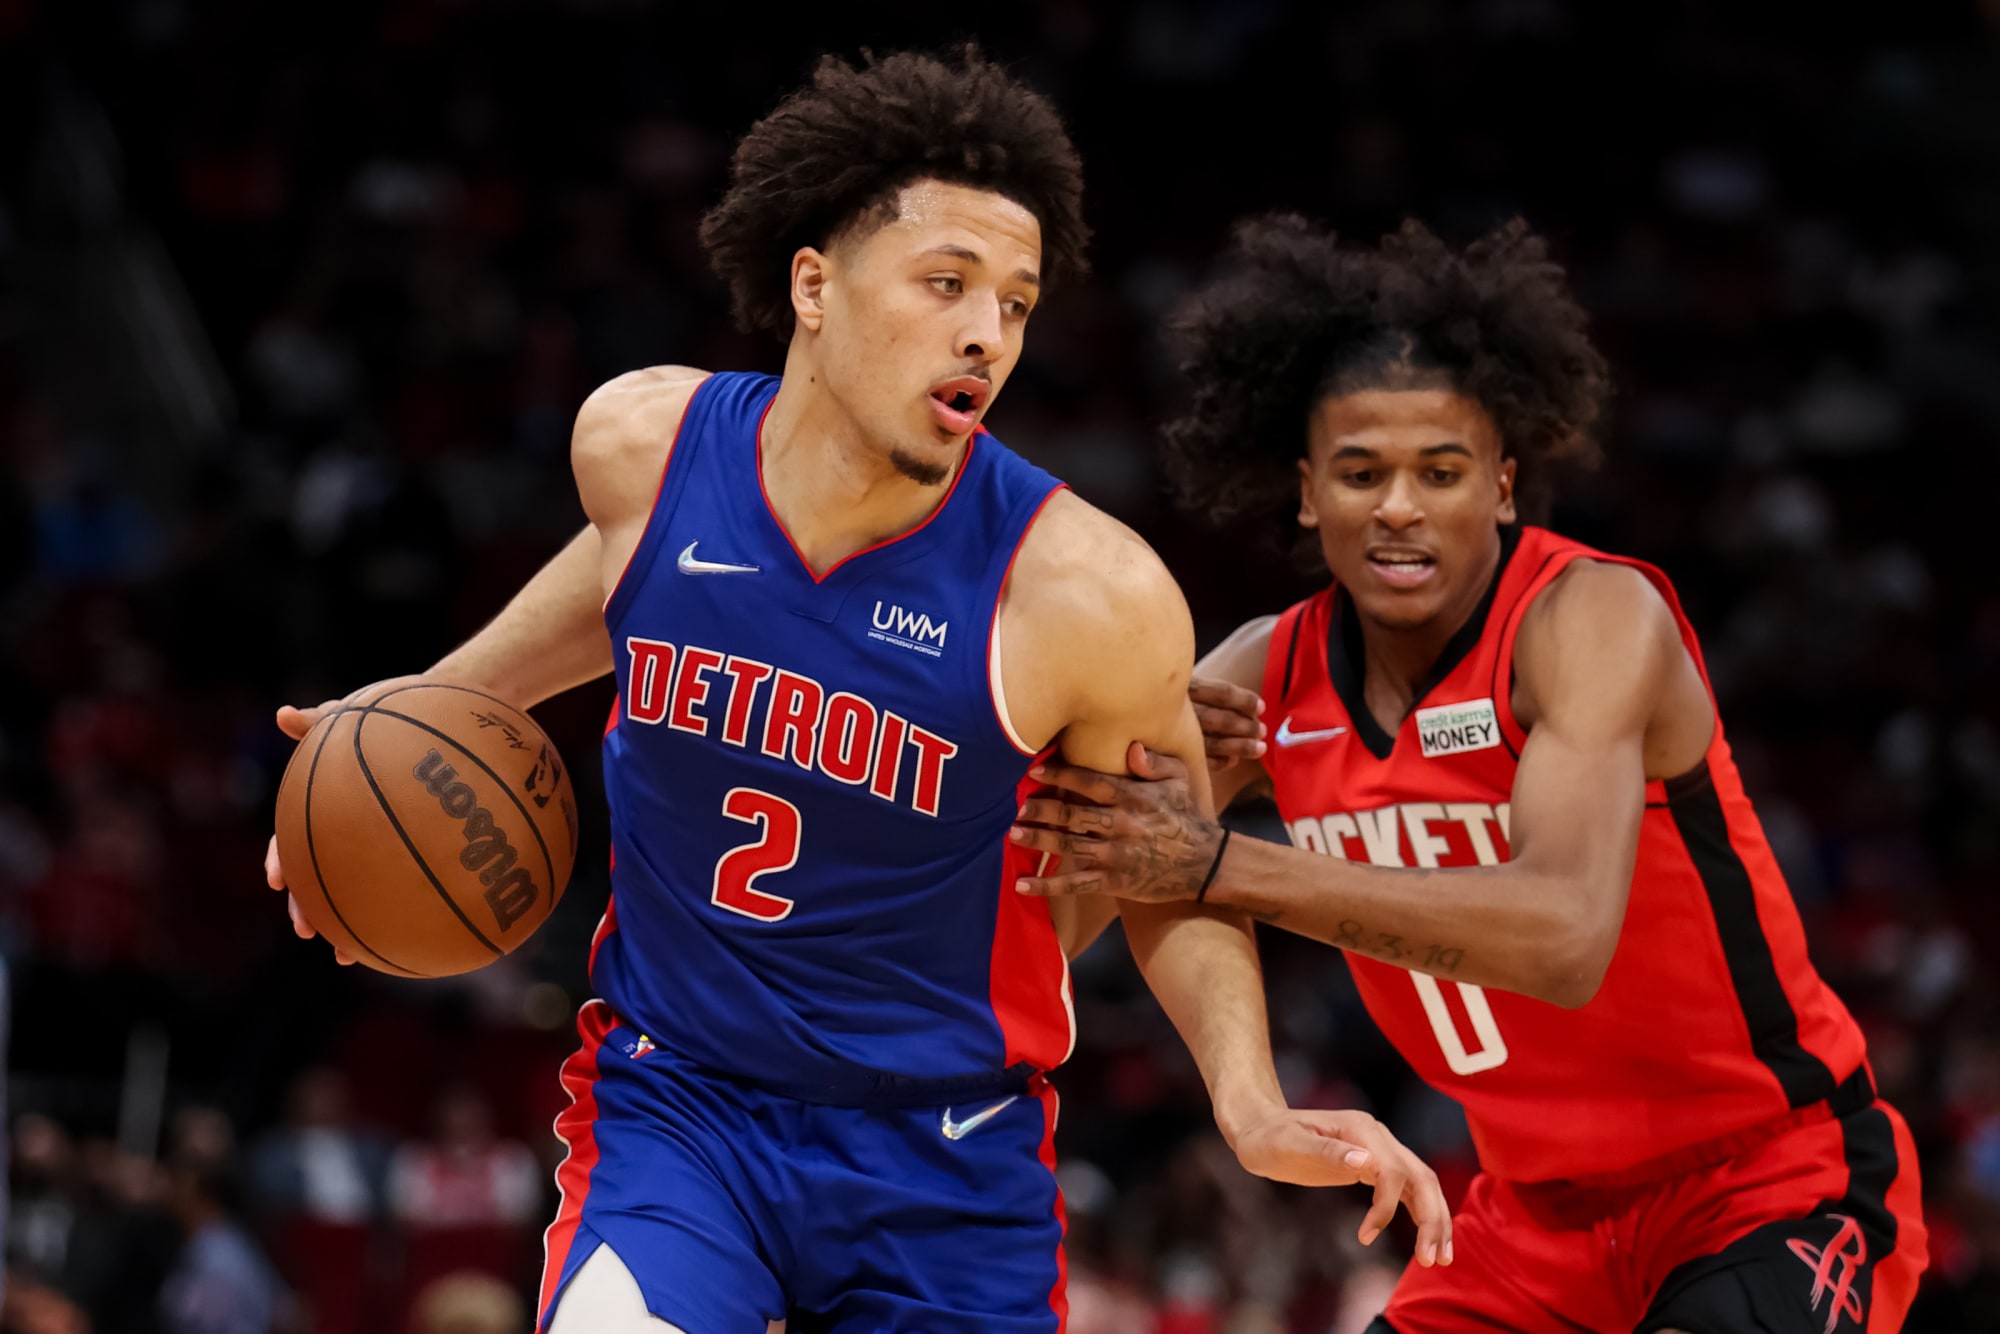 Detroit Pistons: This quality sets Cade Cunningham apart from his peers